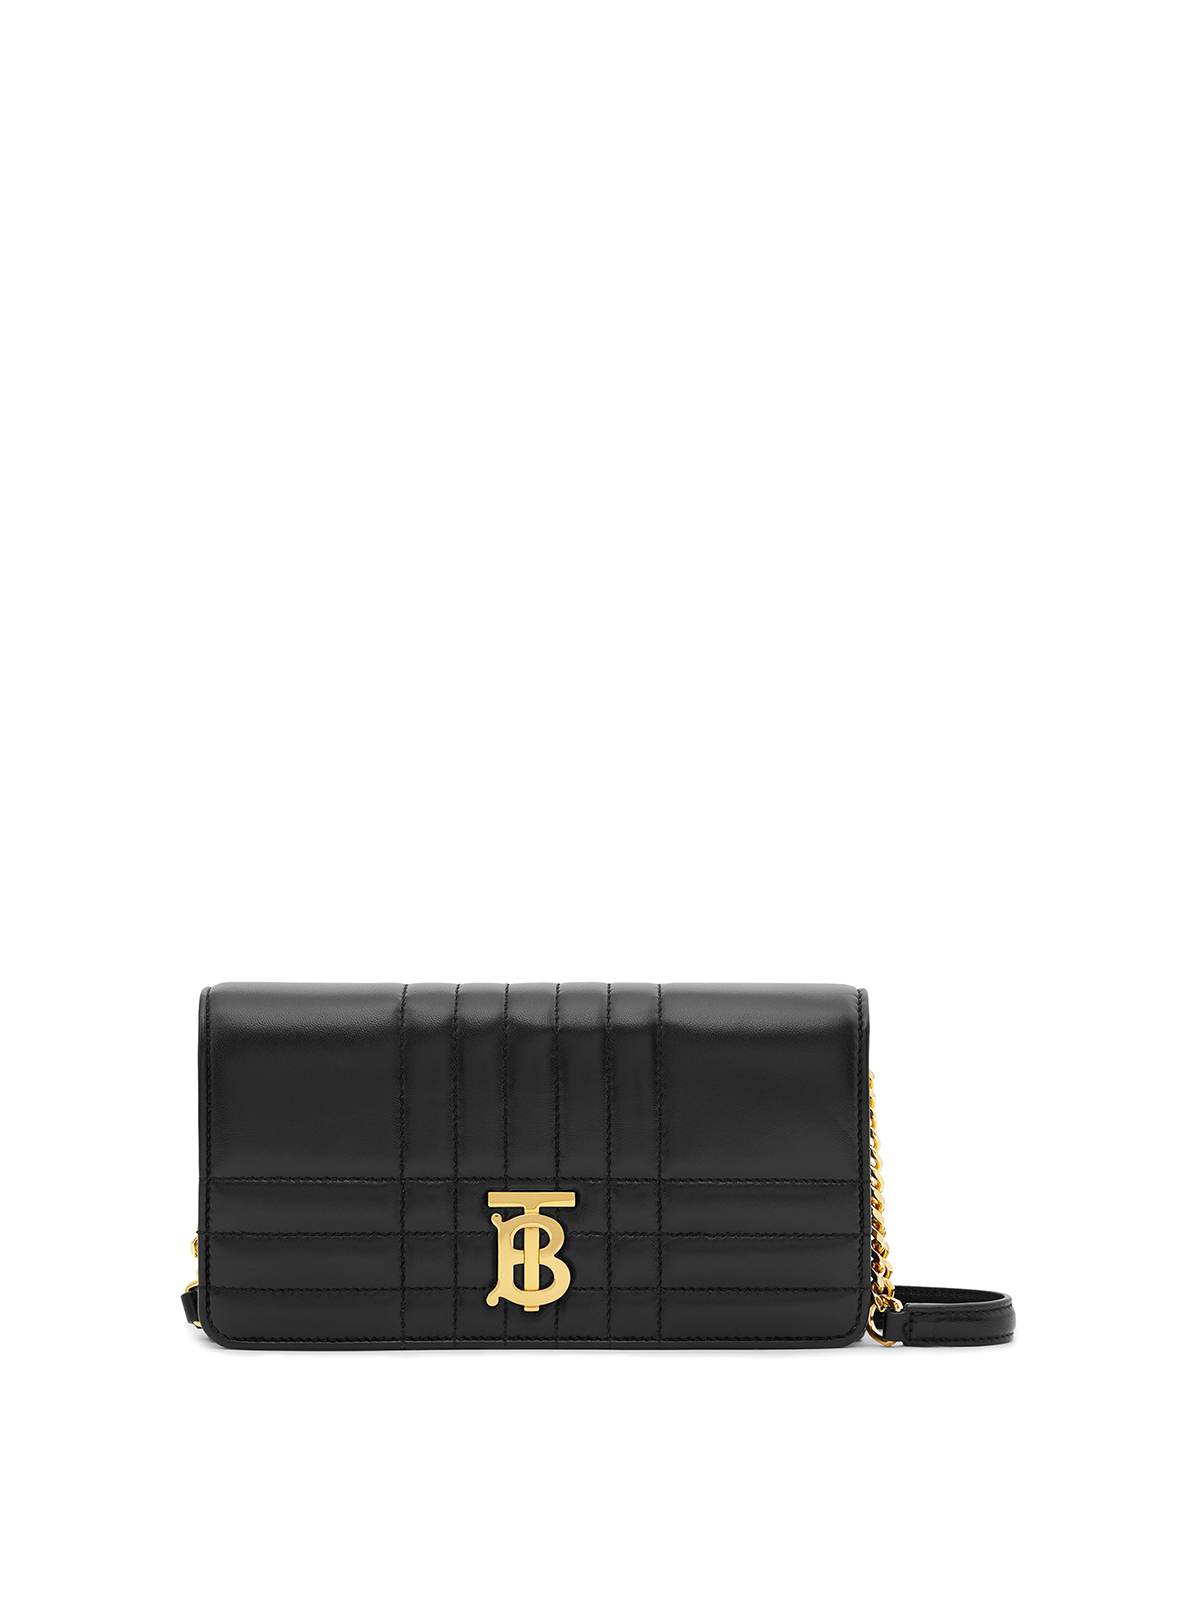 Burberry, Bags, Burberry Wallet Black